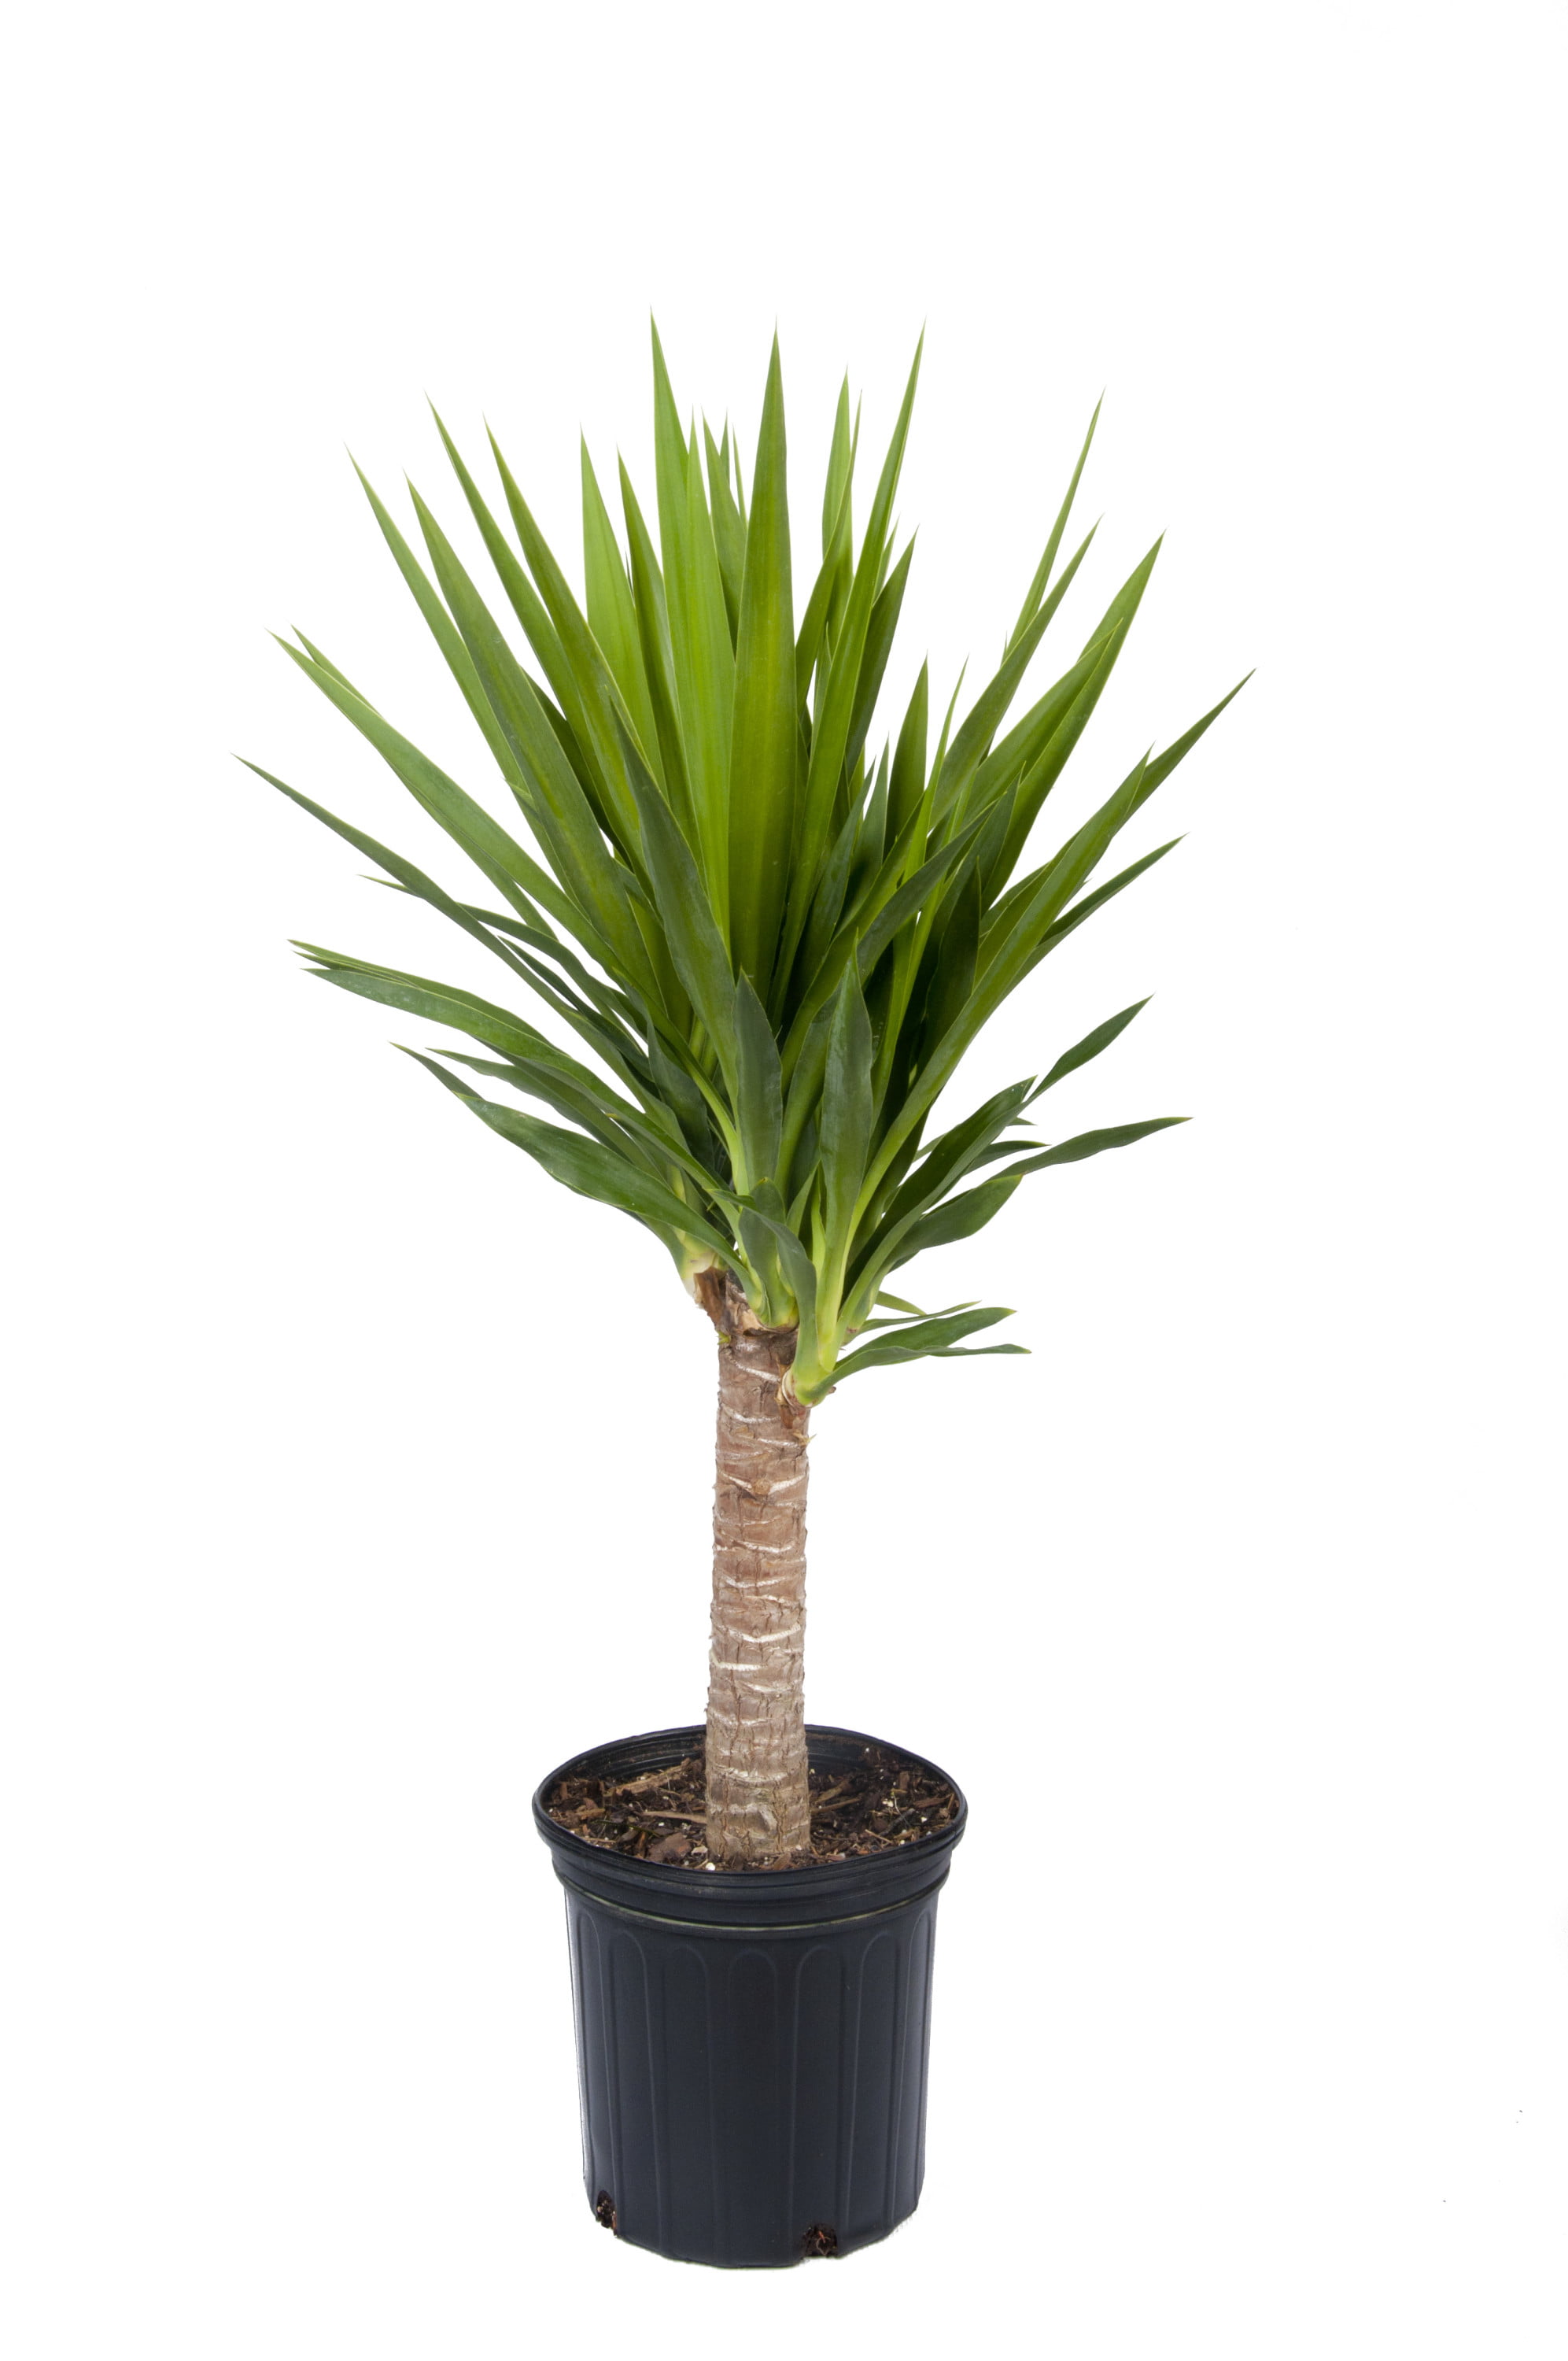 Costa Farms Live Indoor 10in. Tall Green Yucca Cane; Medium, Indirect Light  Plant in 10in. Grower Pot